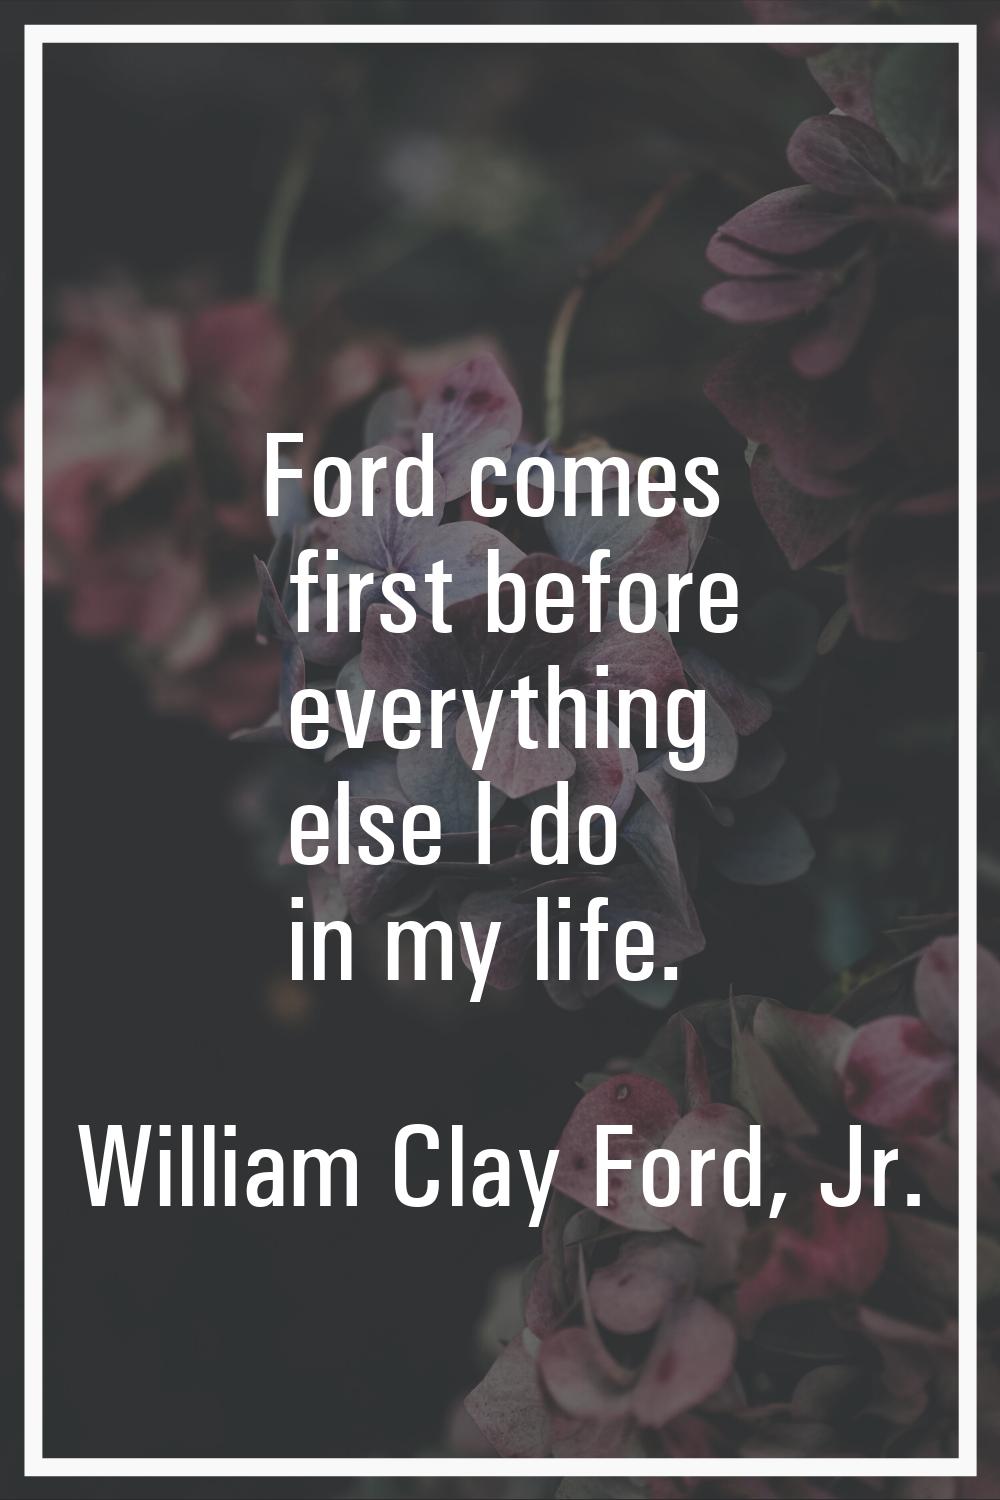 Ford comes first before everything else I do in my life.